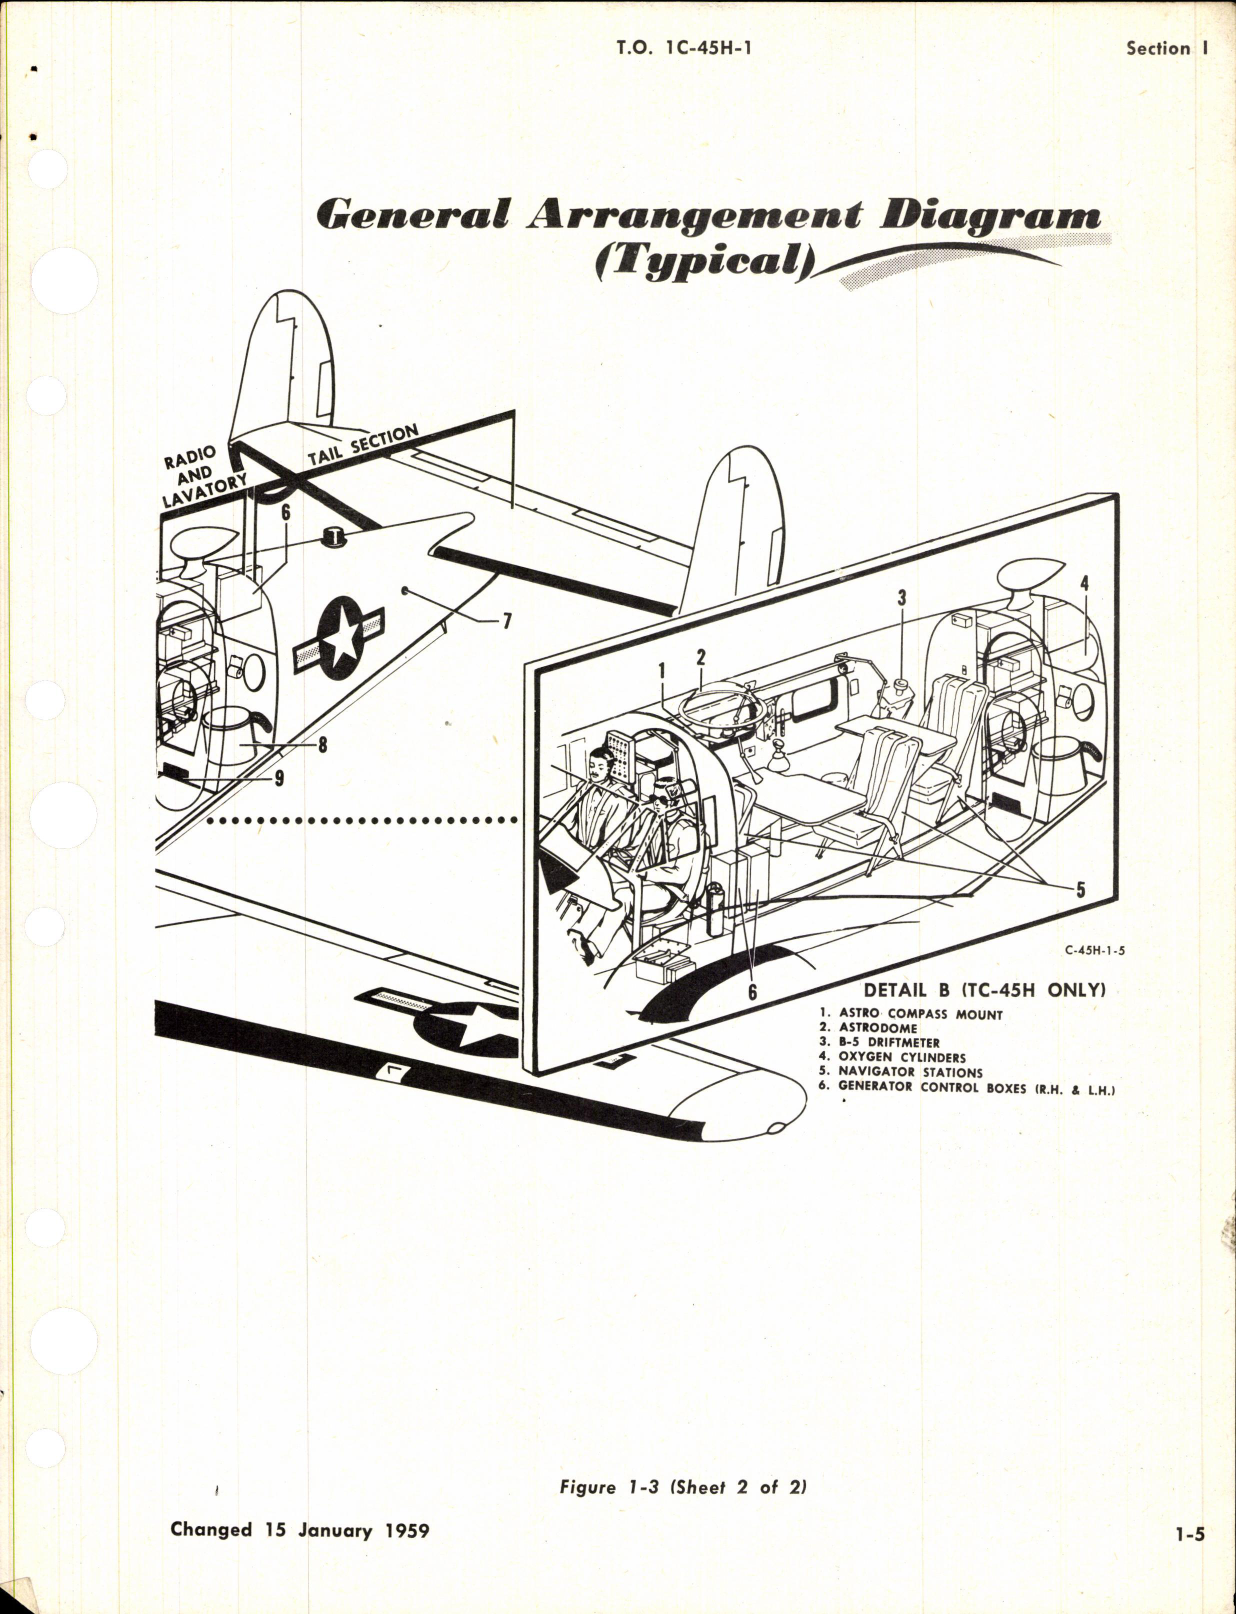 Sample page 5 from AirCorps Library document: Flight Manual for TC-45H and C-45H